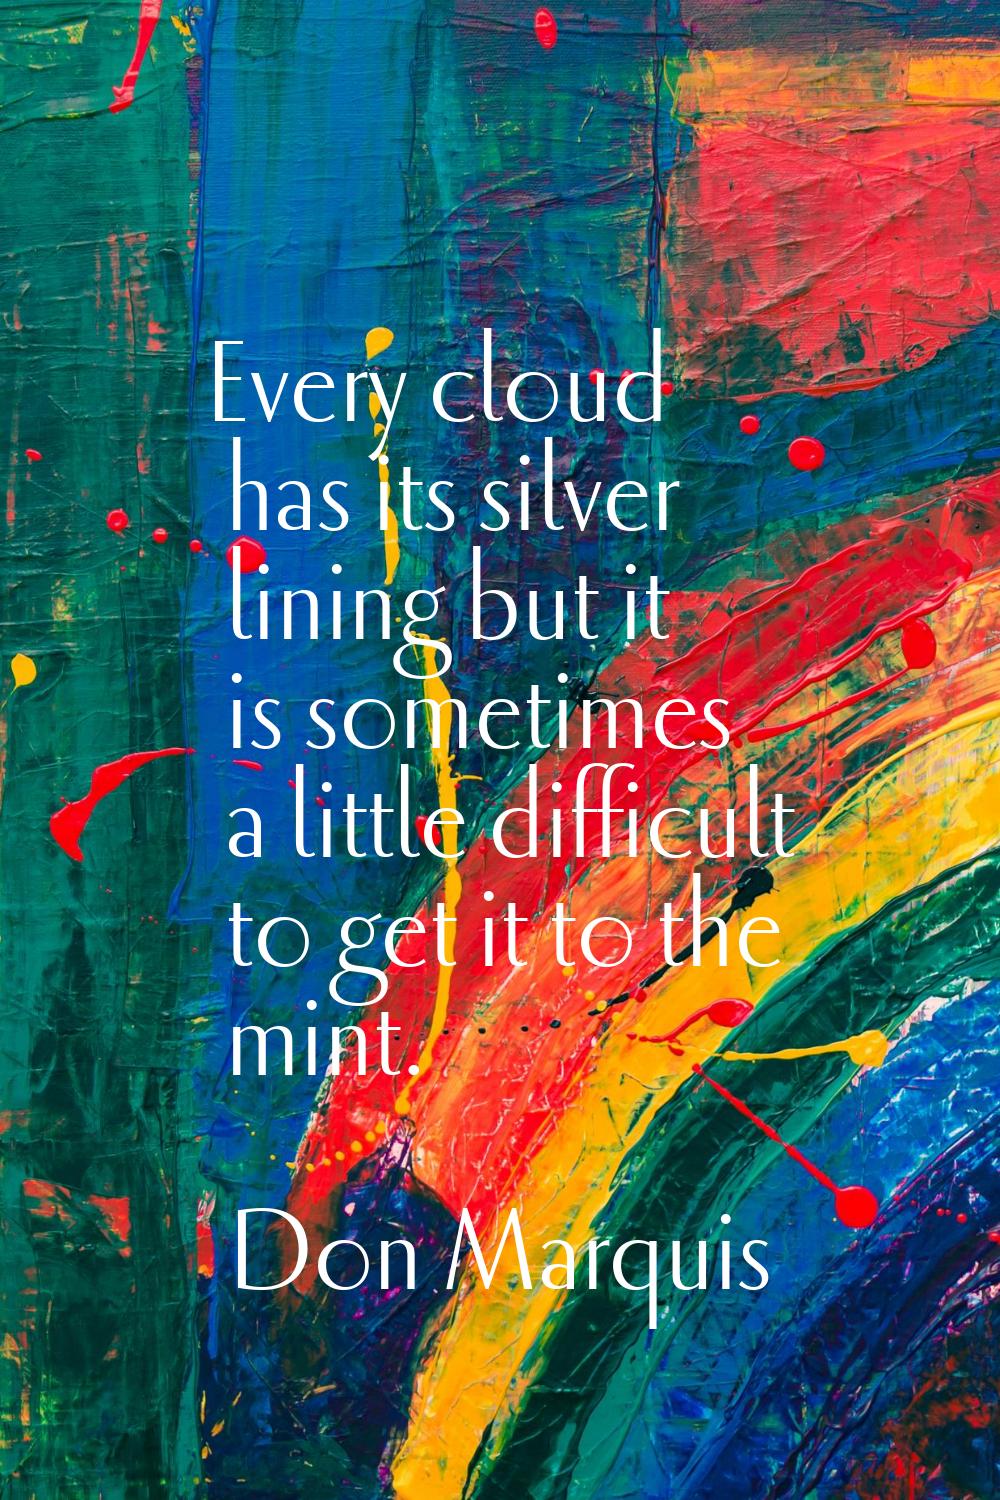 Every cloud has its silver lining but it is sometimes a little difficult to get it to the mint.